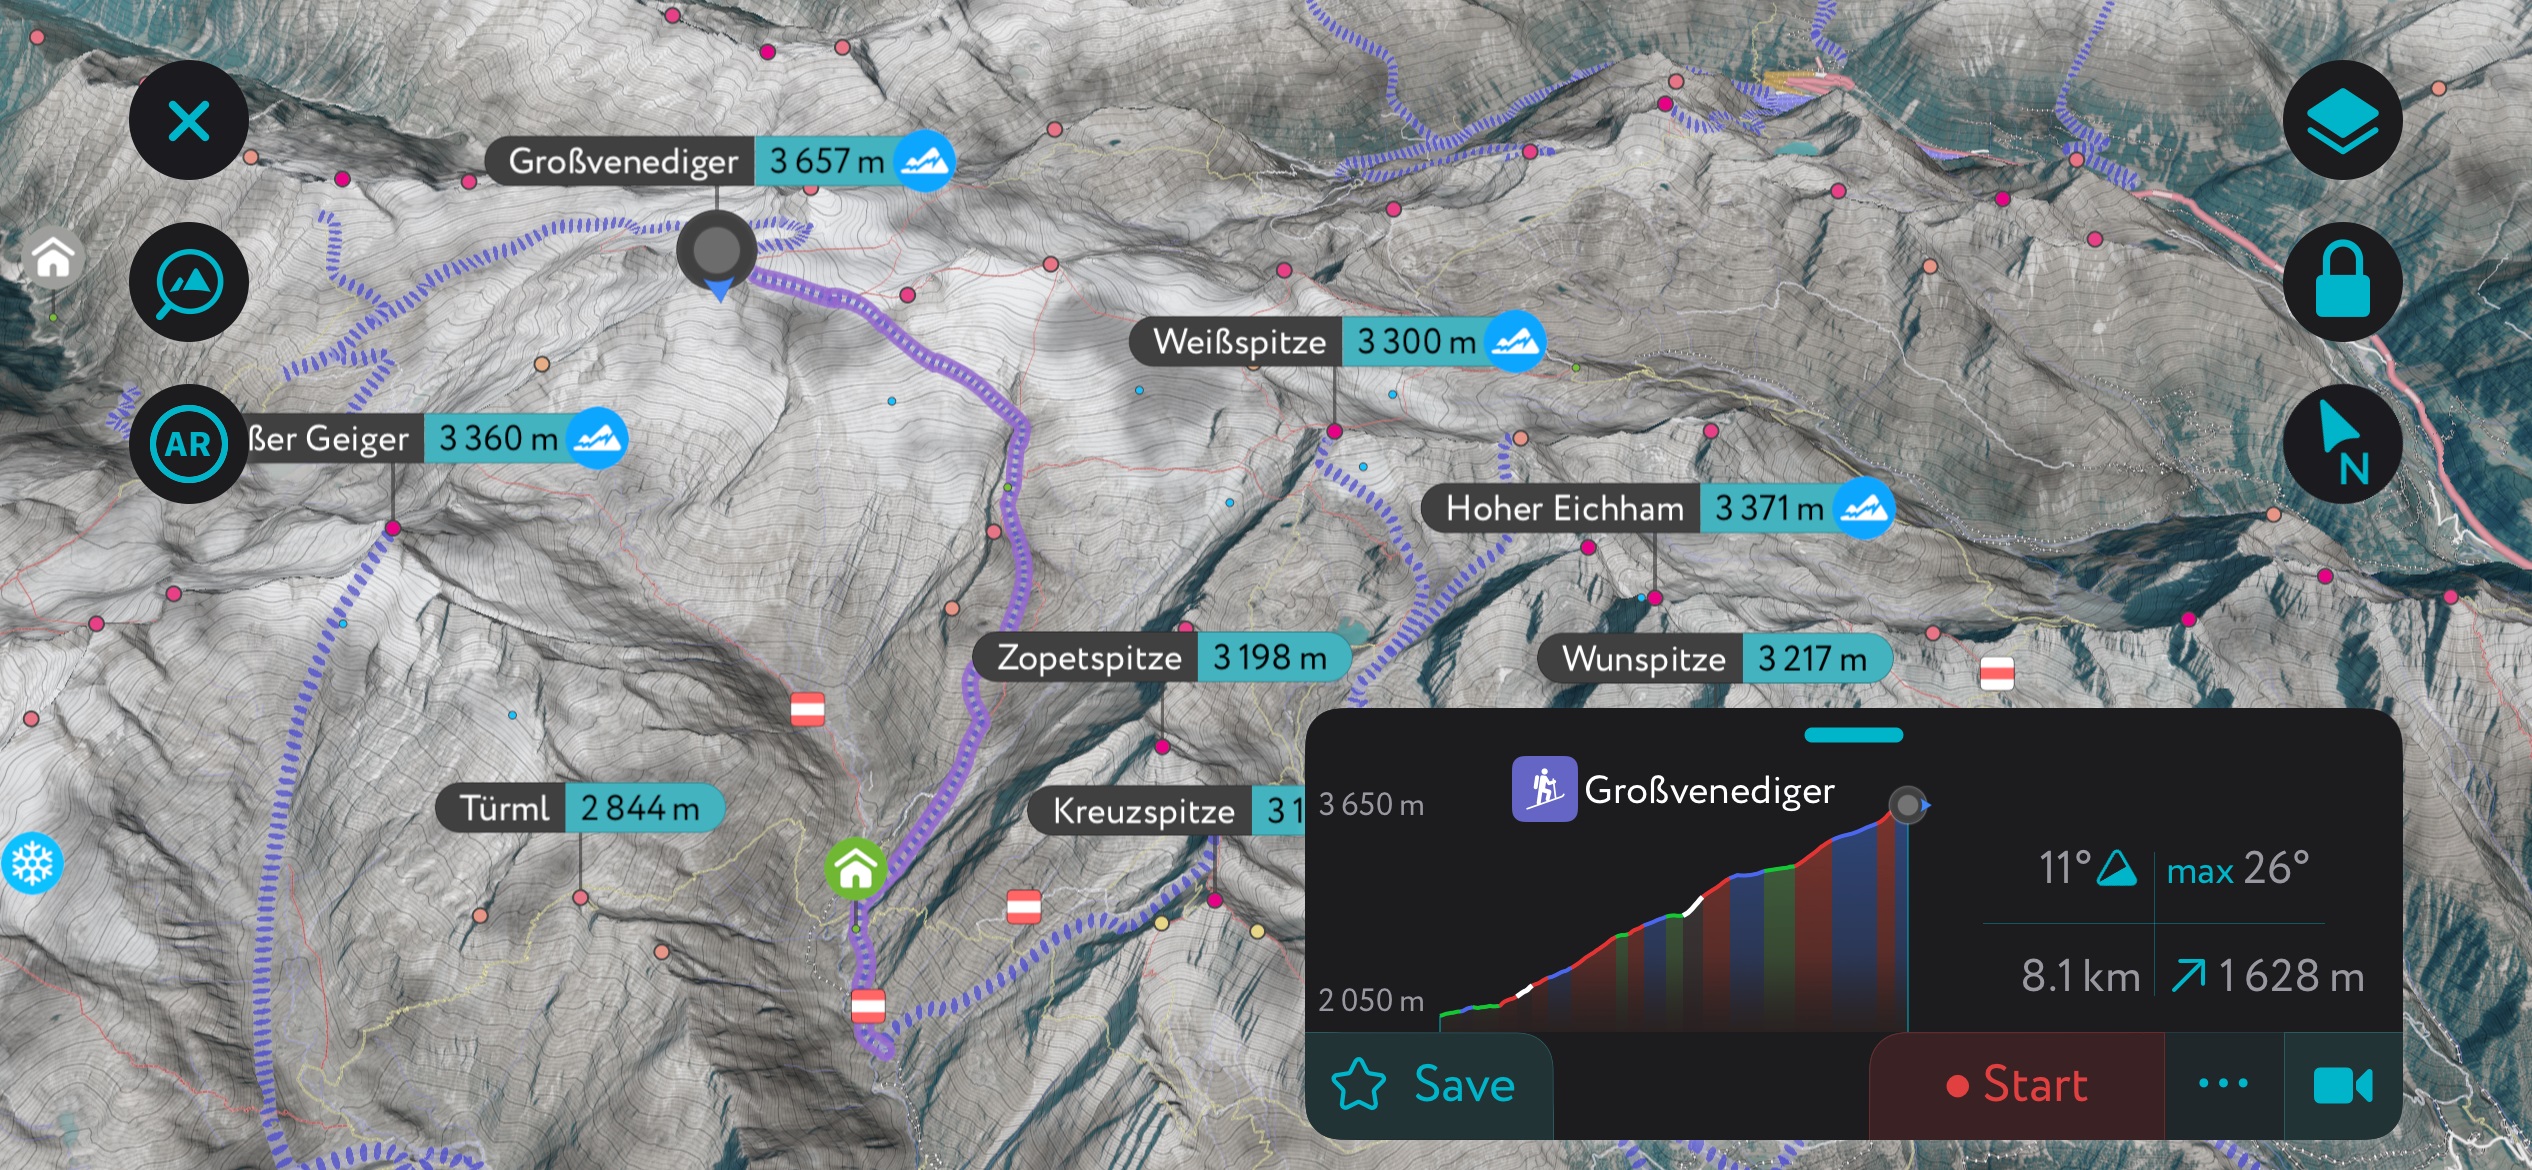 The Großvenediger on PeakVisor’s App. In winter mode, the app includes tens of thousands of backcountry ski routes, in addition to everything else. Venediger Group